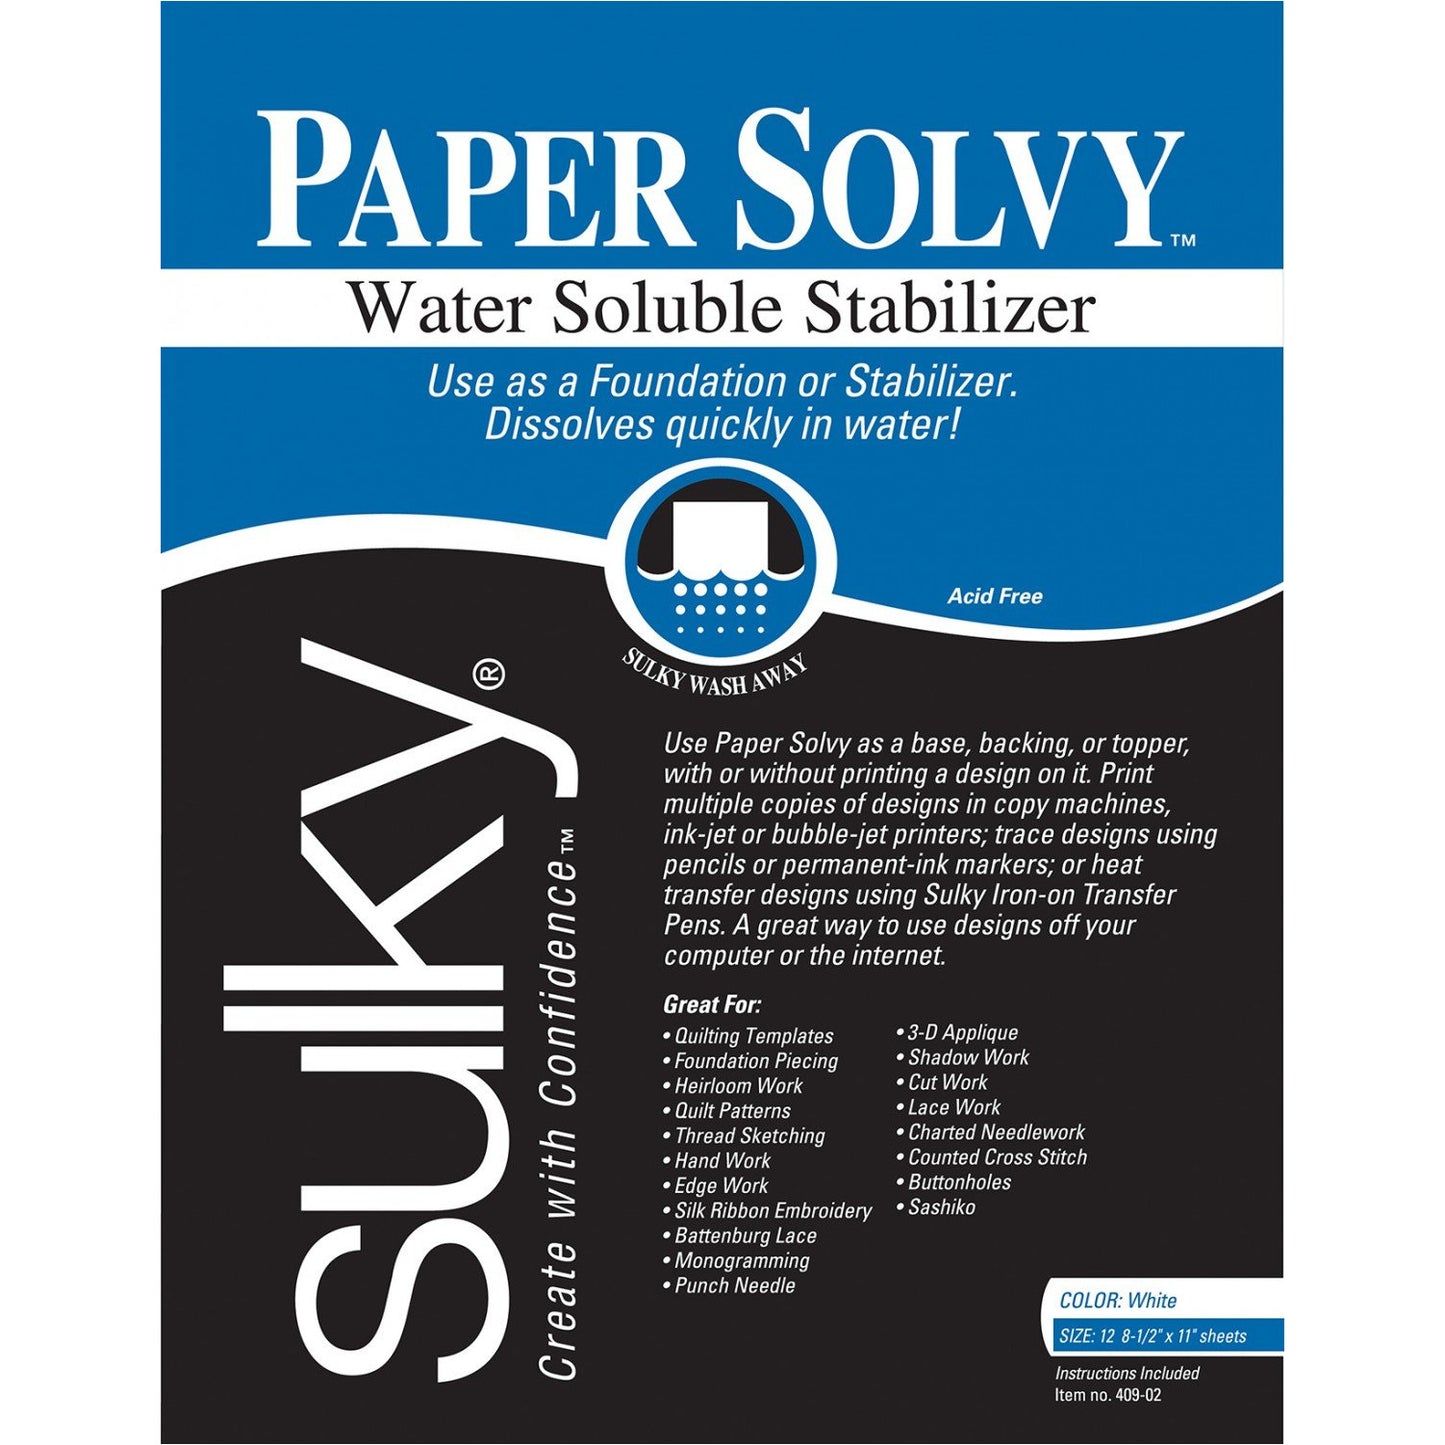 Paper Solvy Water Soluble Stabilizer – Miller's Dry Goods